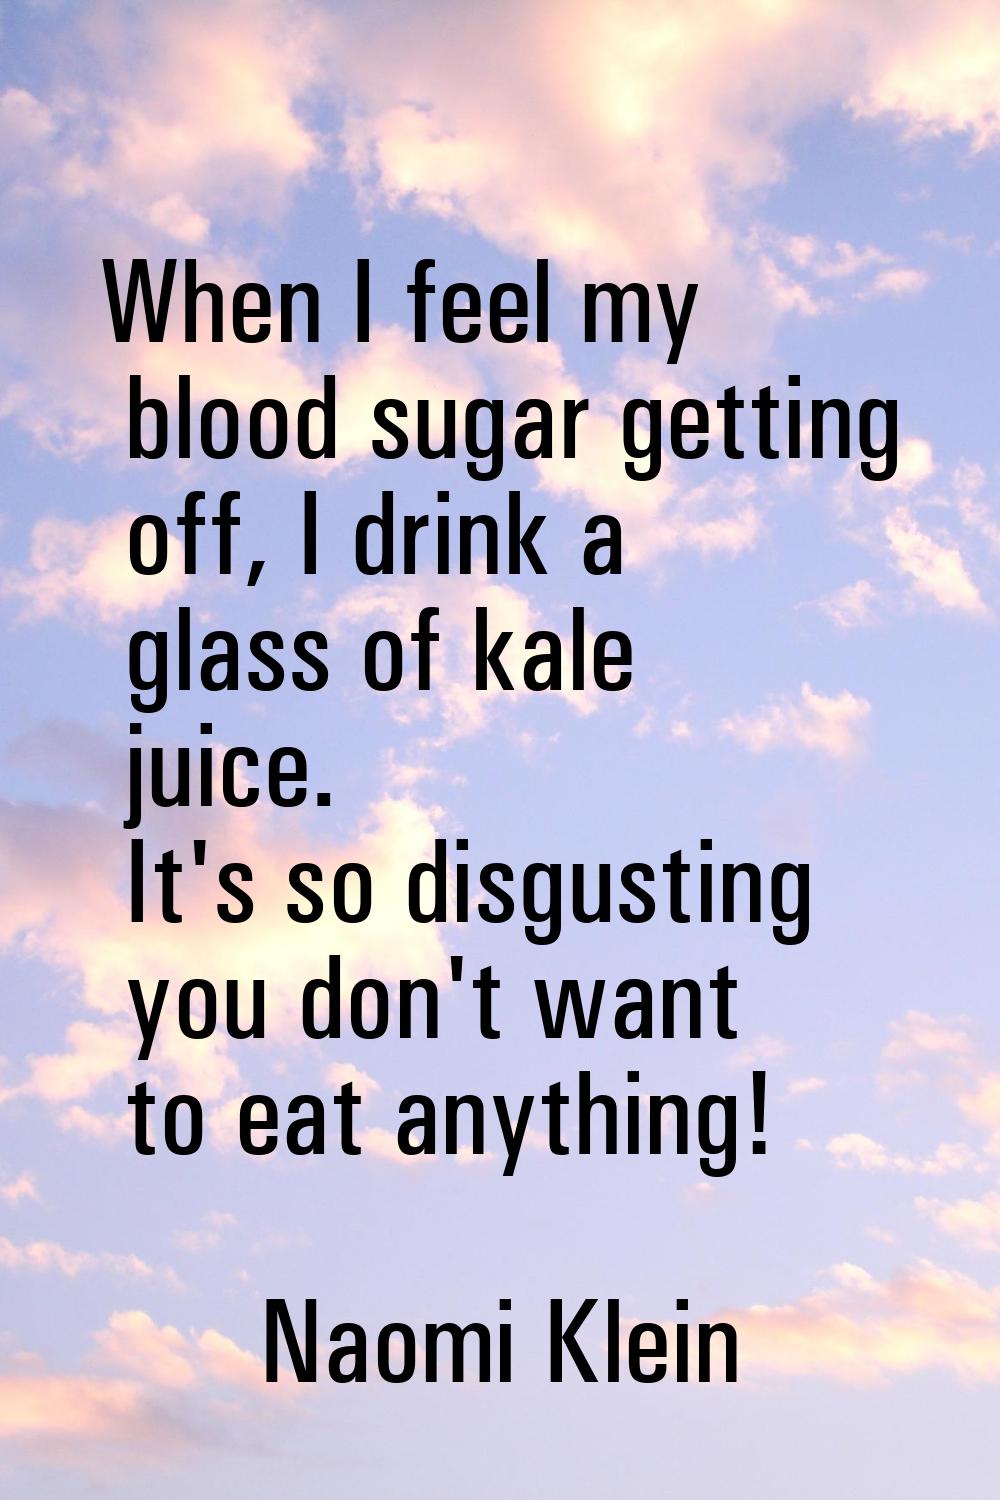 When I feel my blood sugar getting off, I drink a glass of kale juice. It's so disgusting you don't